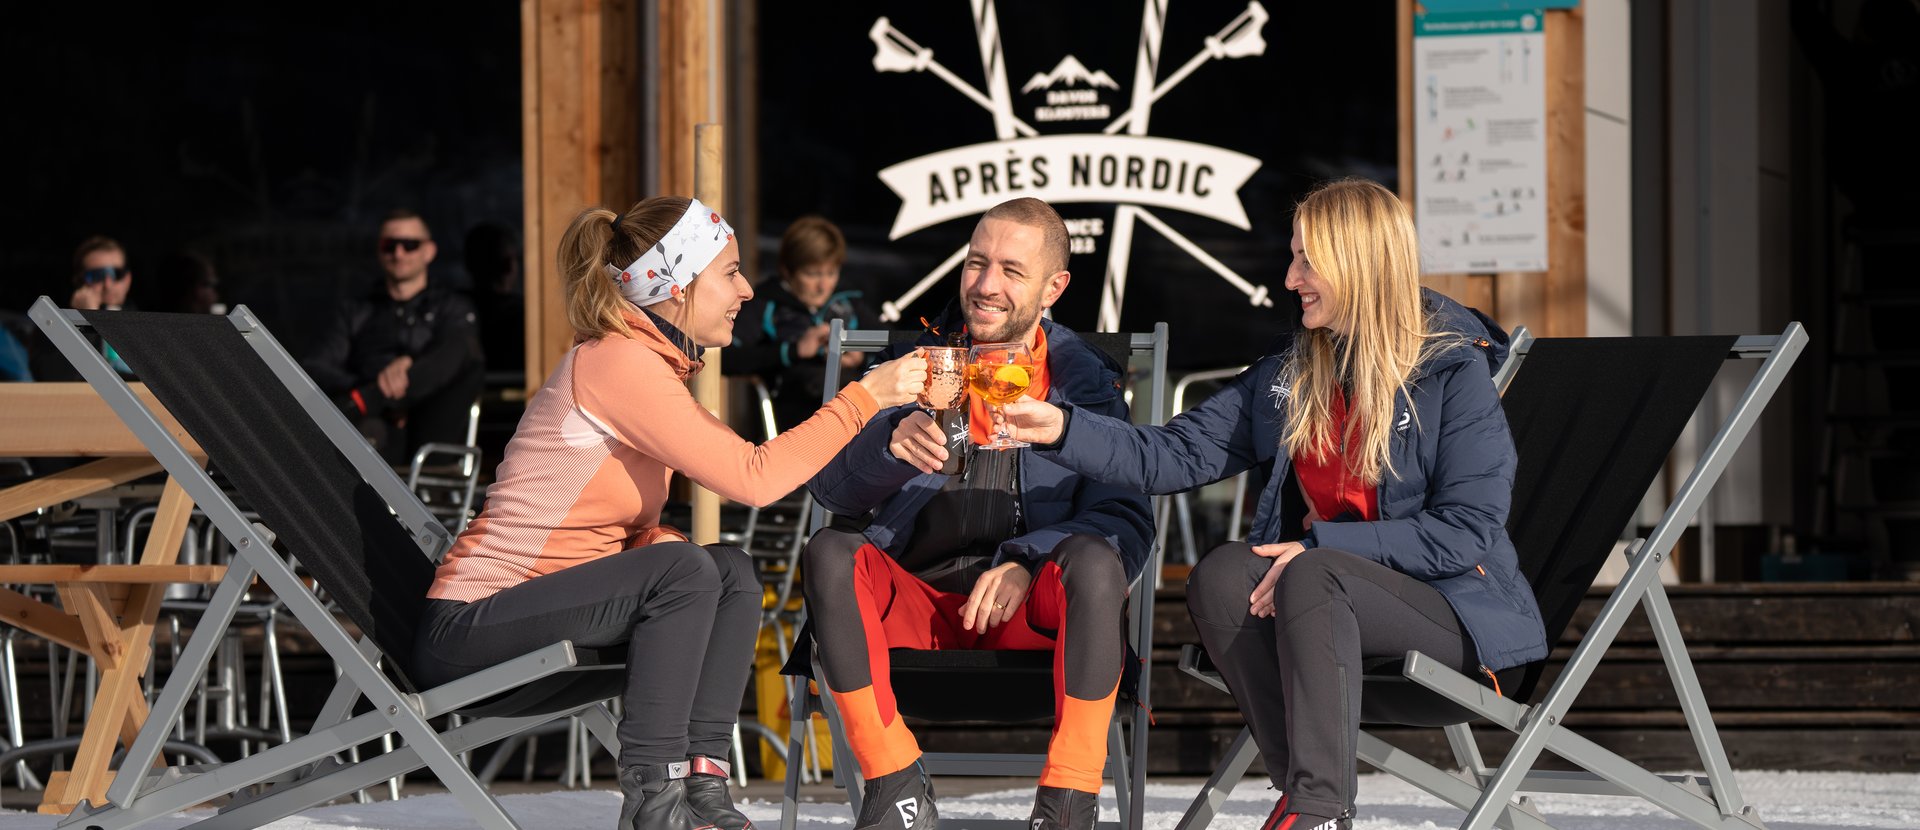 Cross-country skiing with Après Nordic